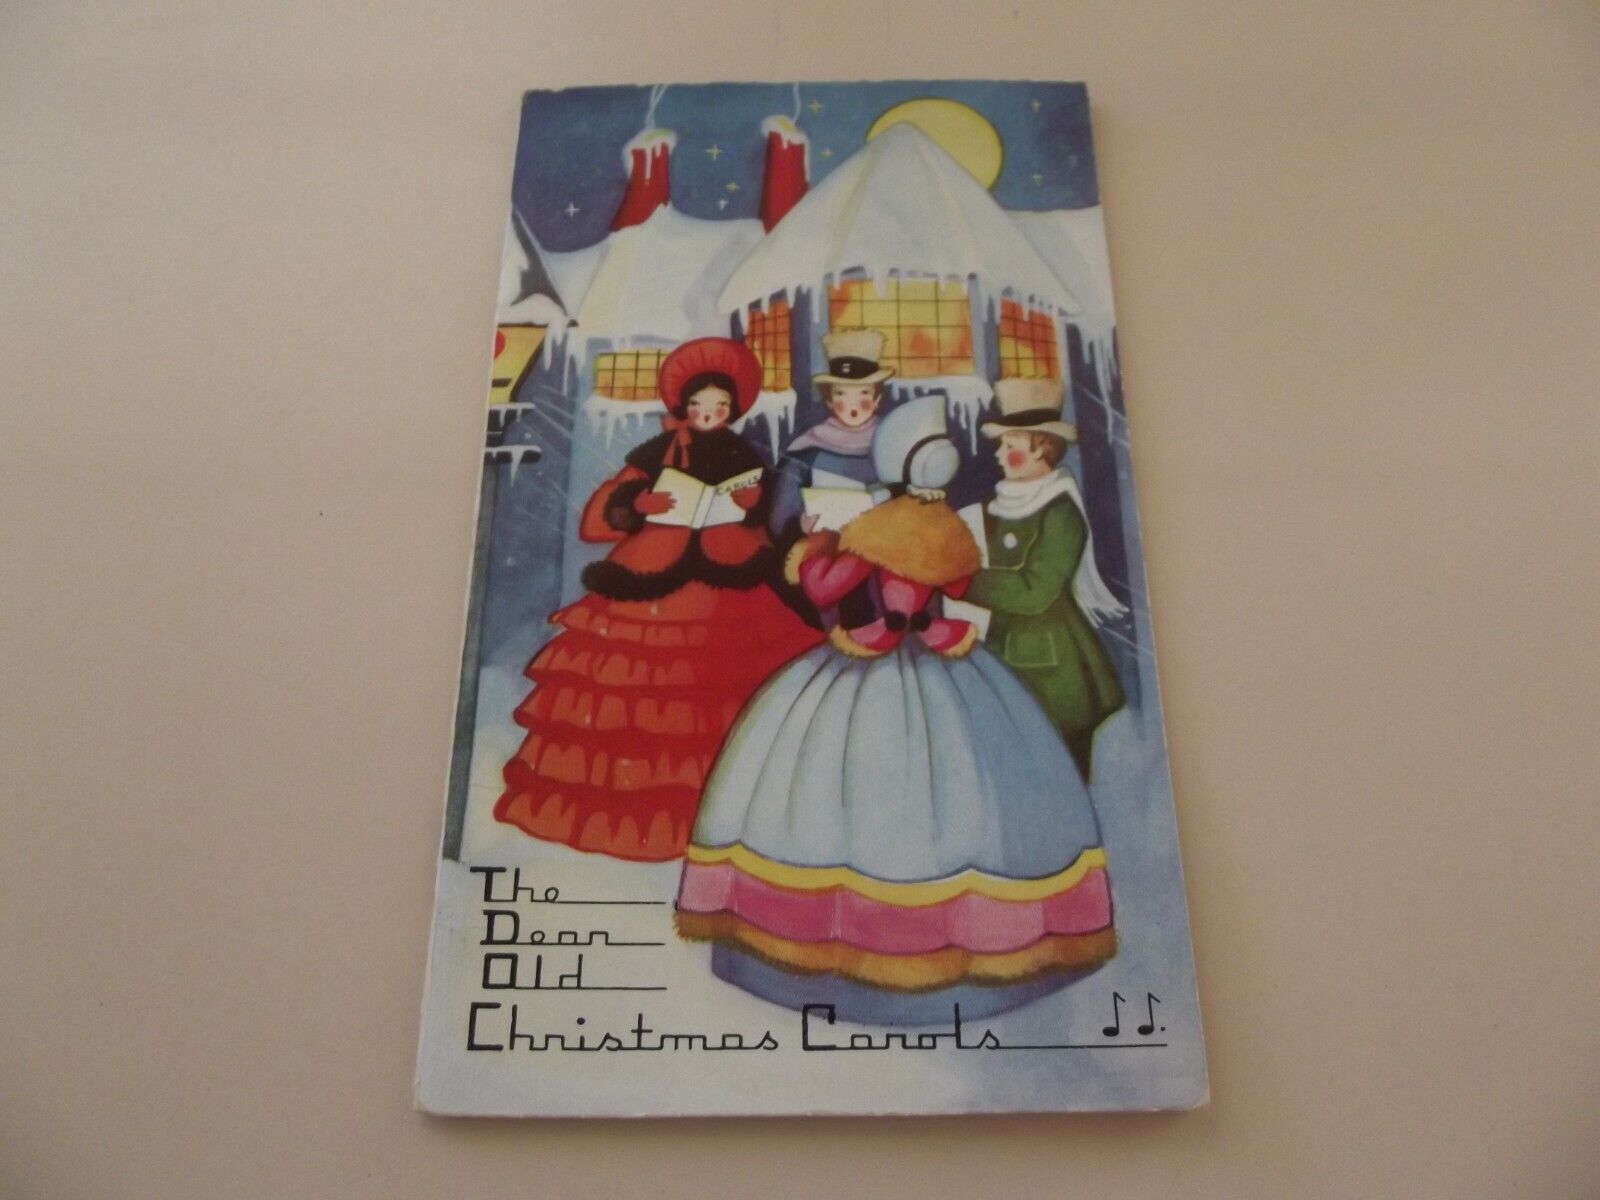 Dear Old Christmas Carols-Vintage 10 Page Song Booklet w/ Holiday Favorites